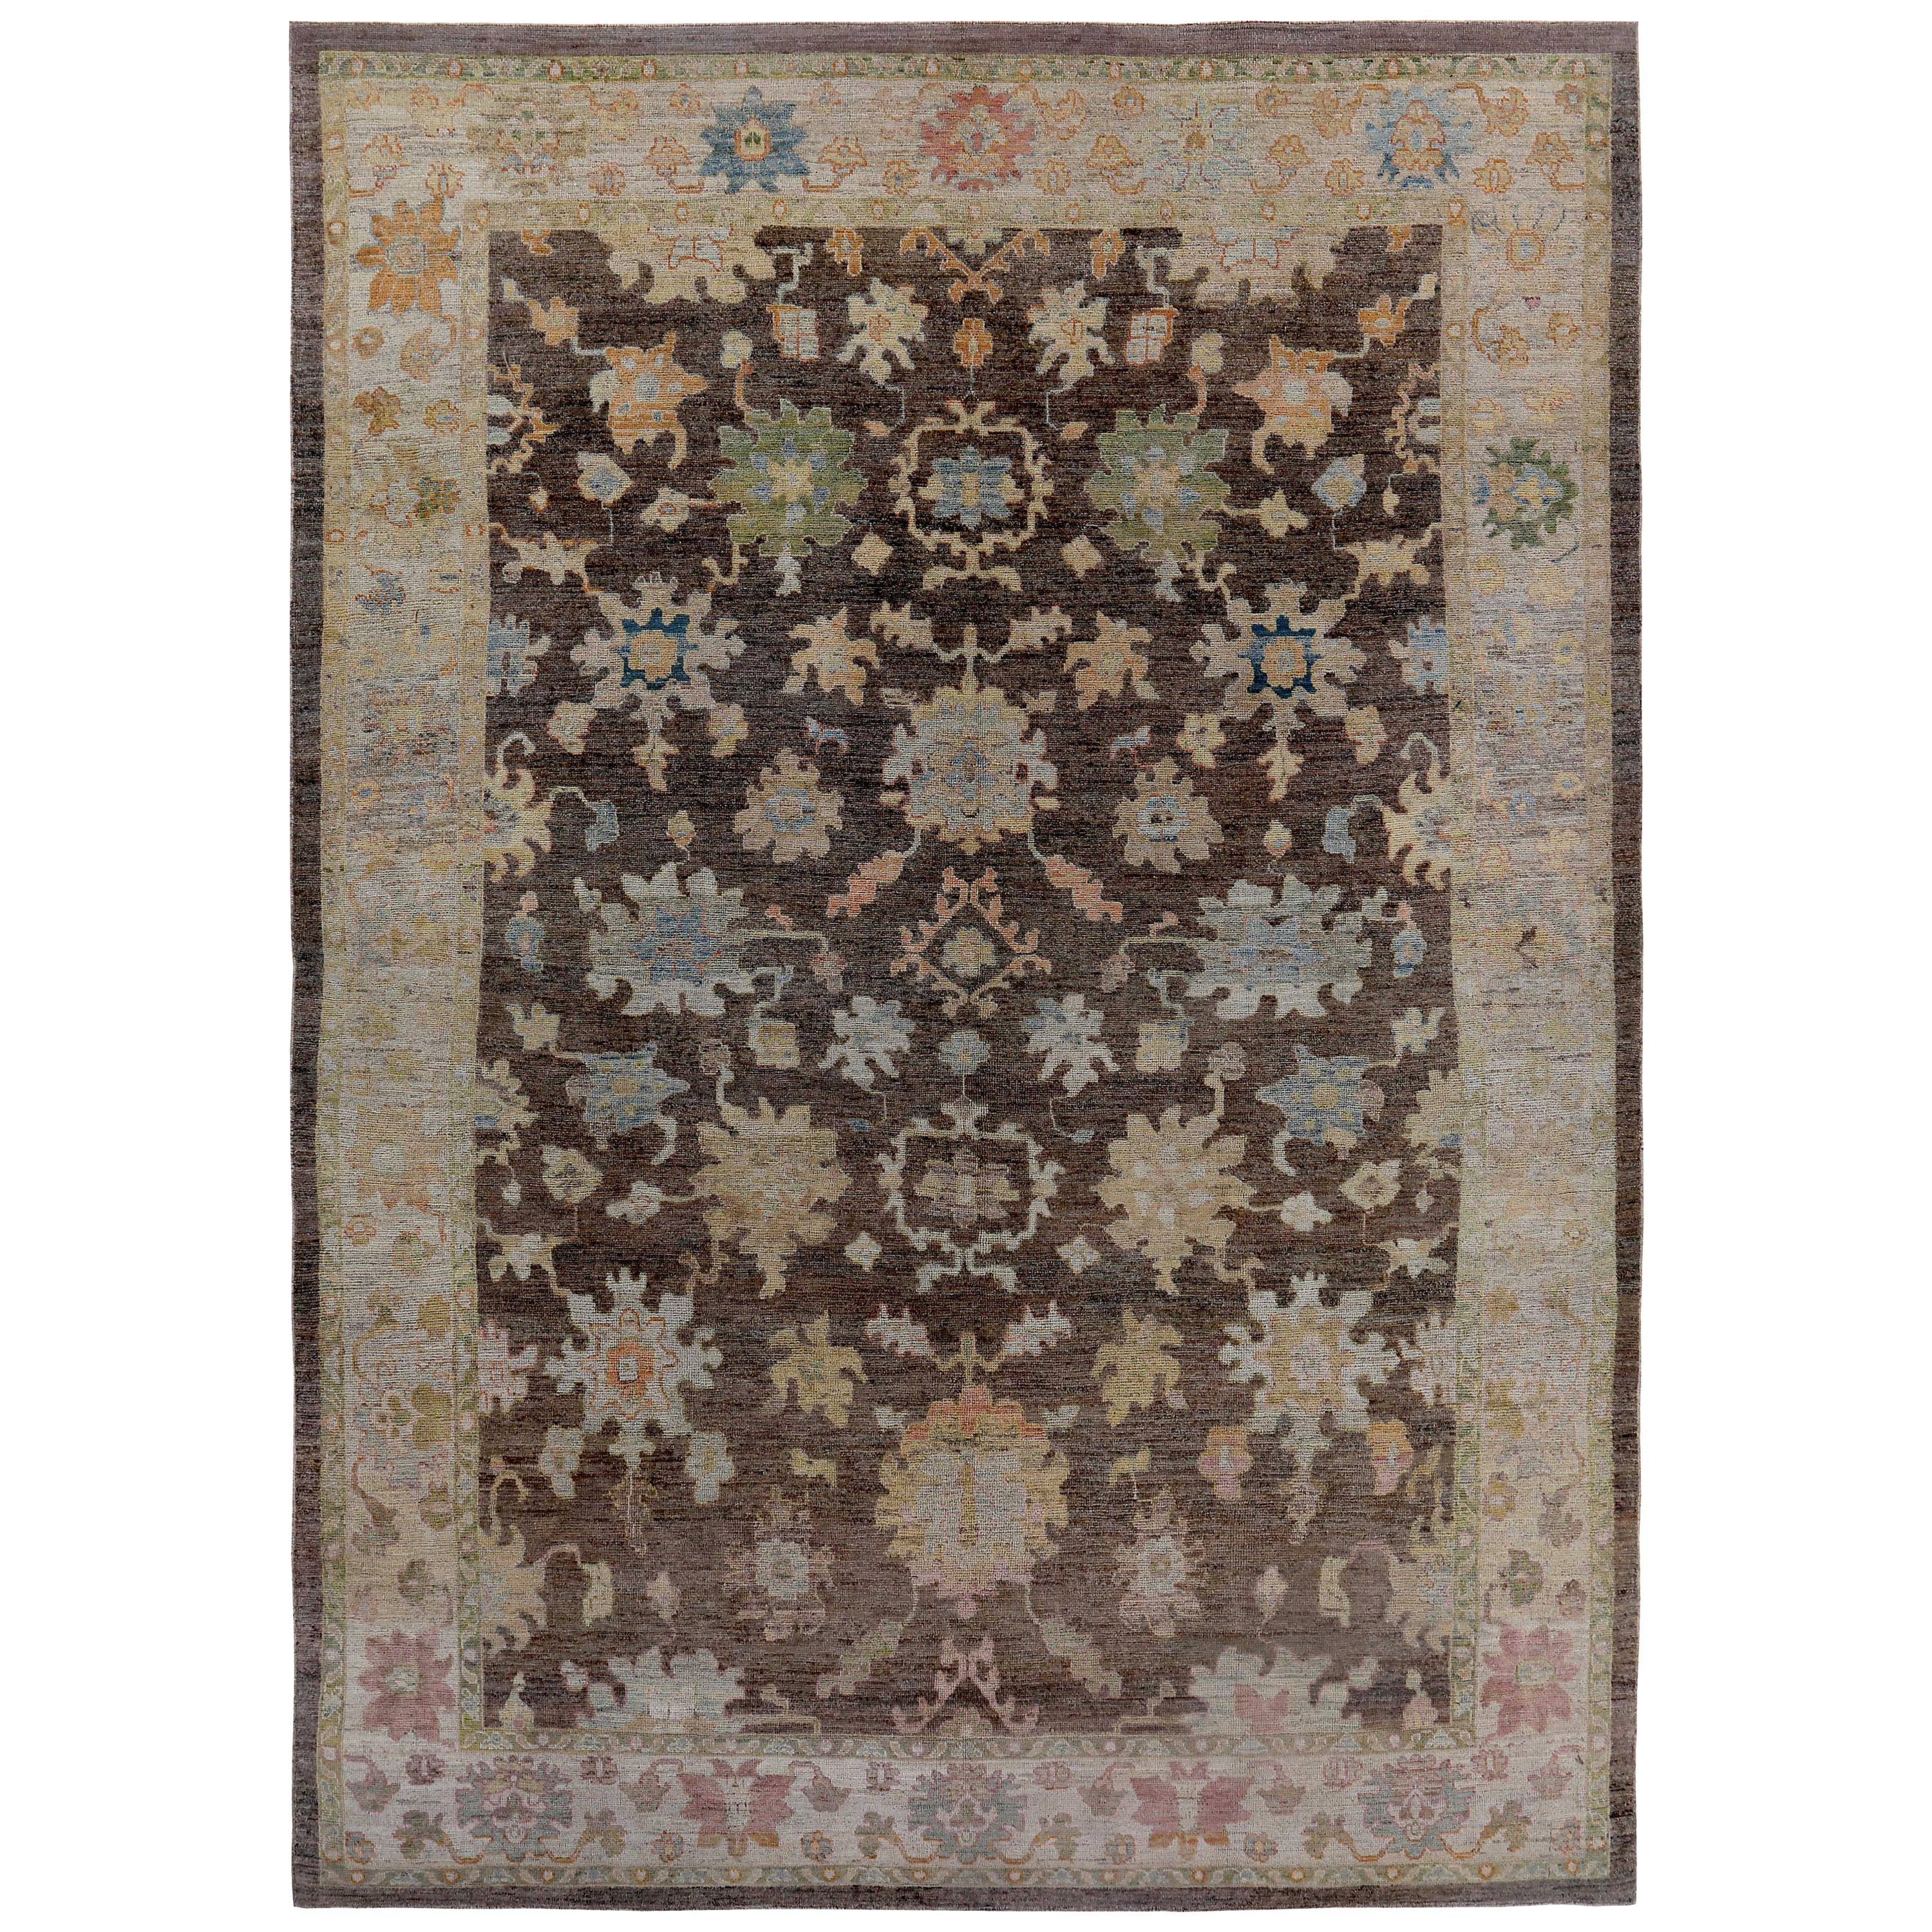 Turkish Oushak Rug with Green and Pink Flower Patterns on Brown and Ivory Field